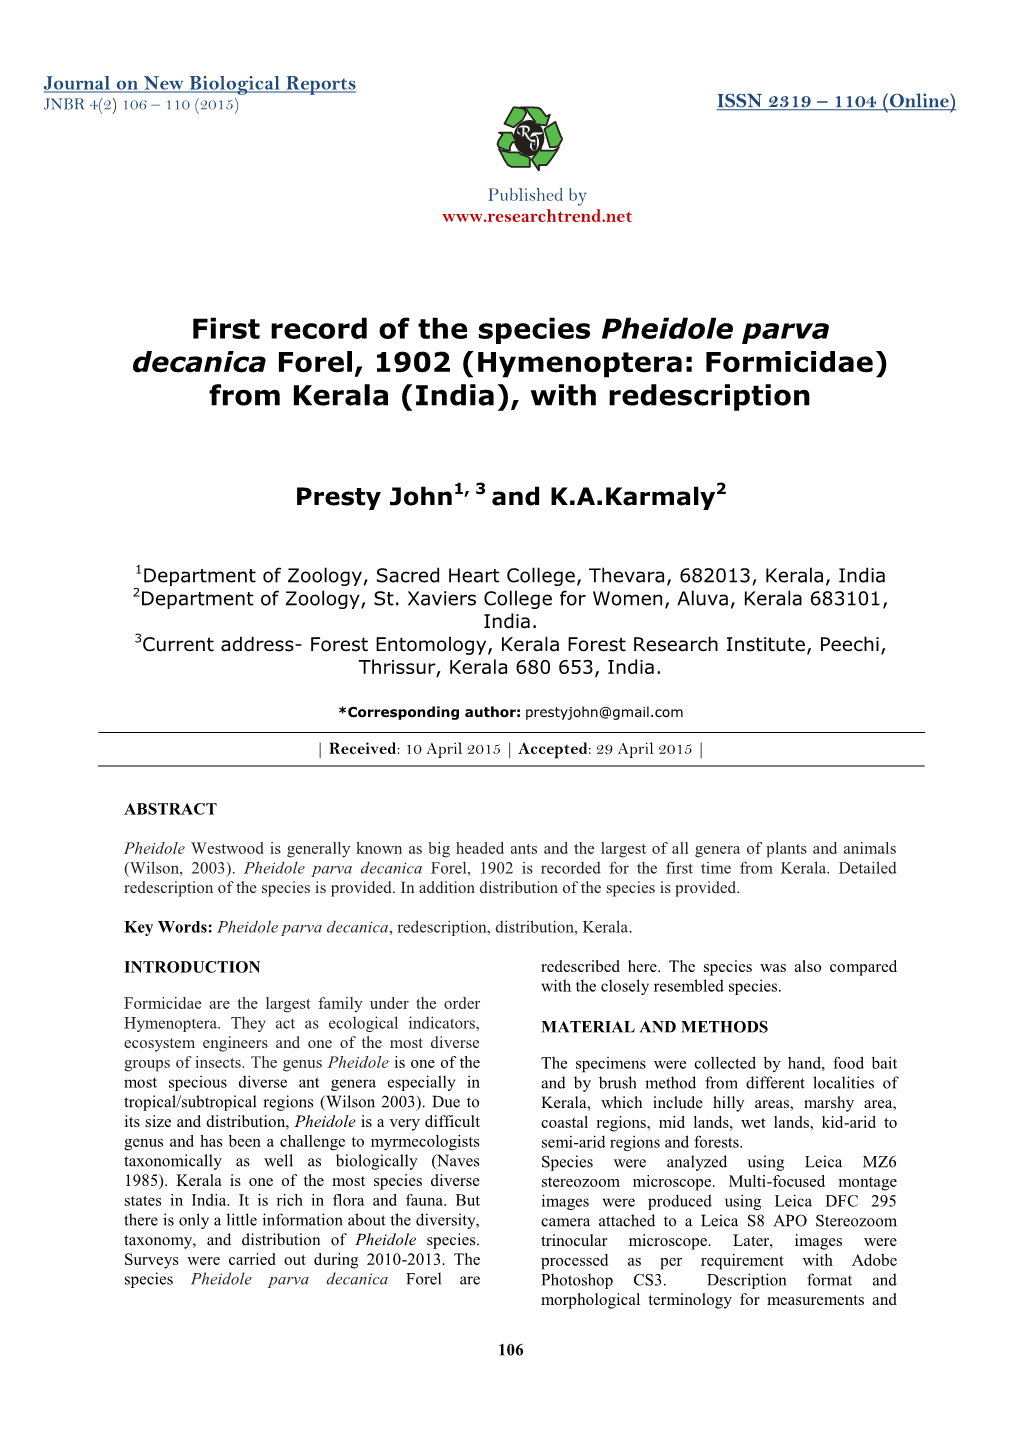 First Record of the Species Pheidole Parva Decanica Forel, 1902 (Hymenoptera: Formicidae) from Kerala (India), with Redescription